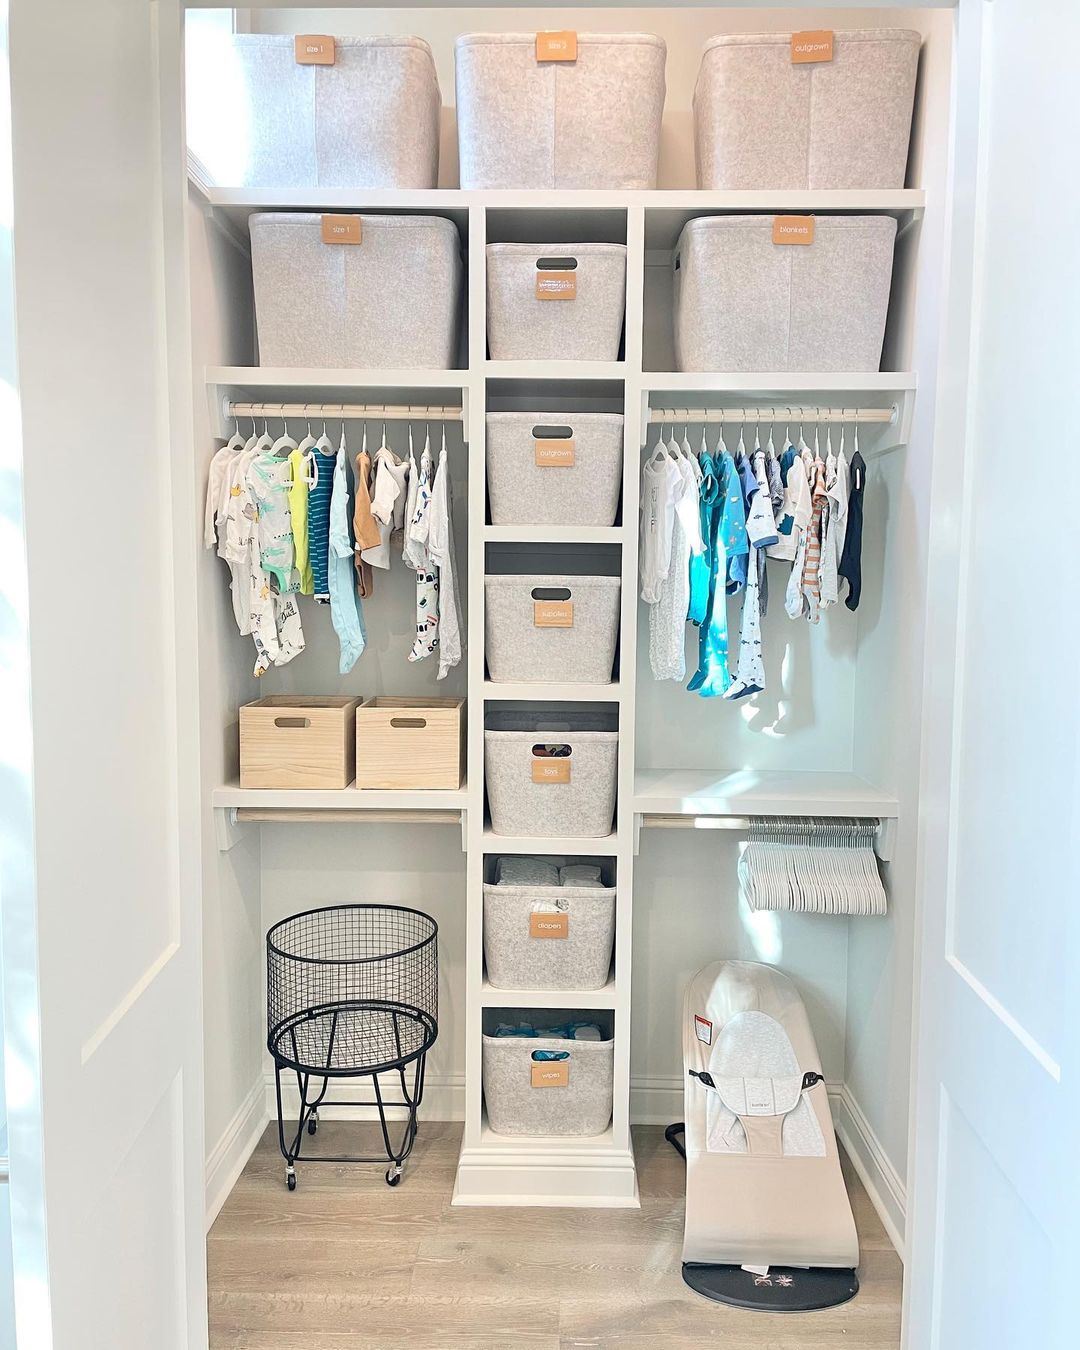 Nursery Organization Ideas: Simplify and Beautify Your Baby's Space ...